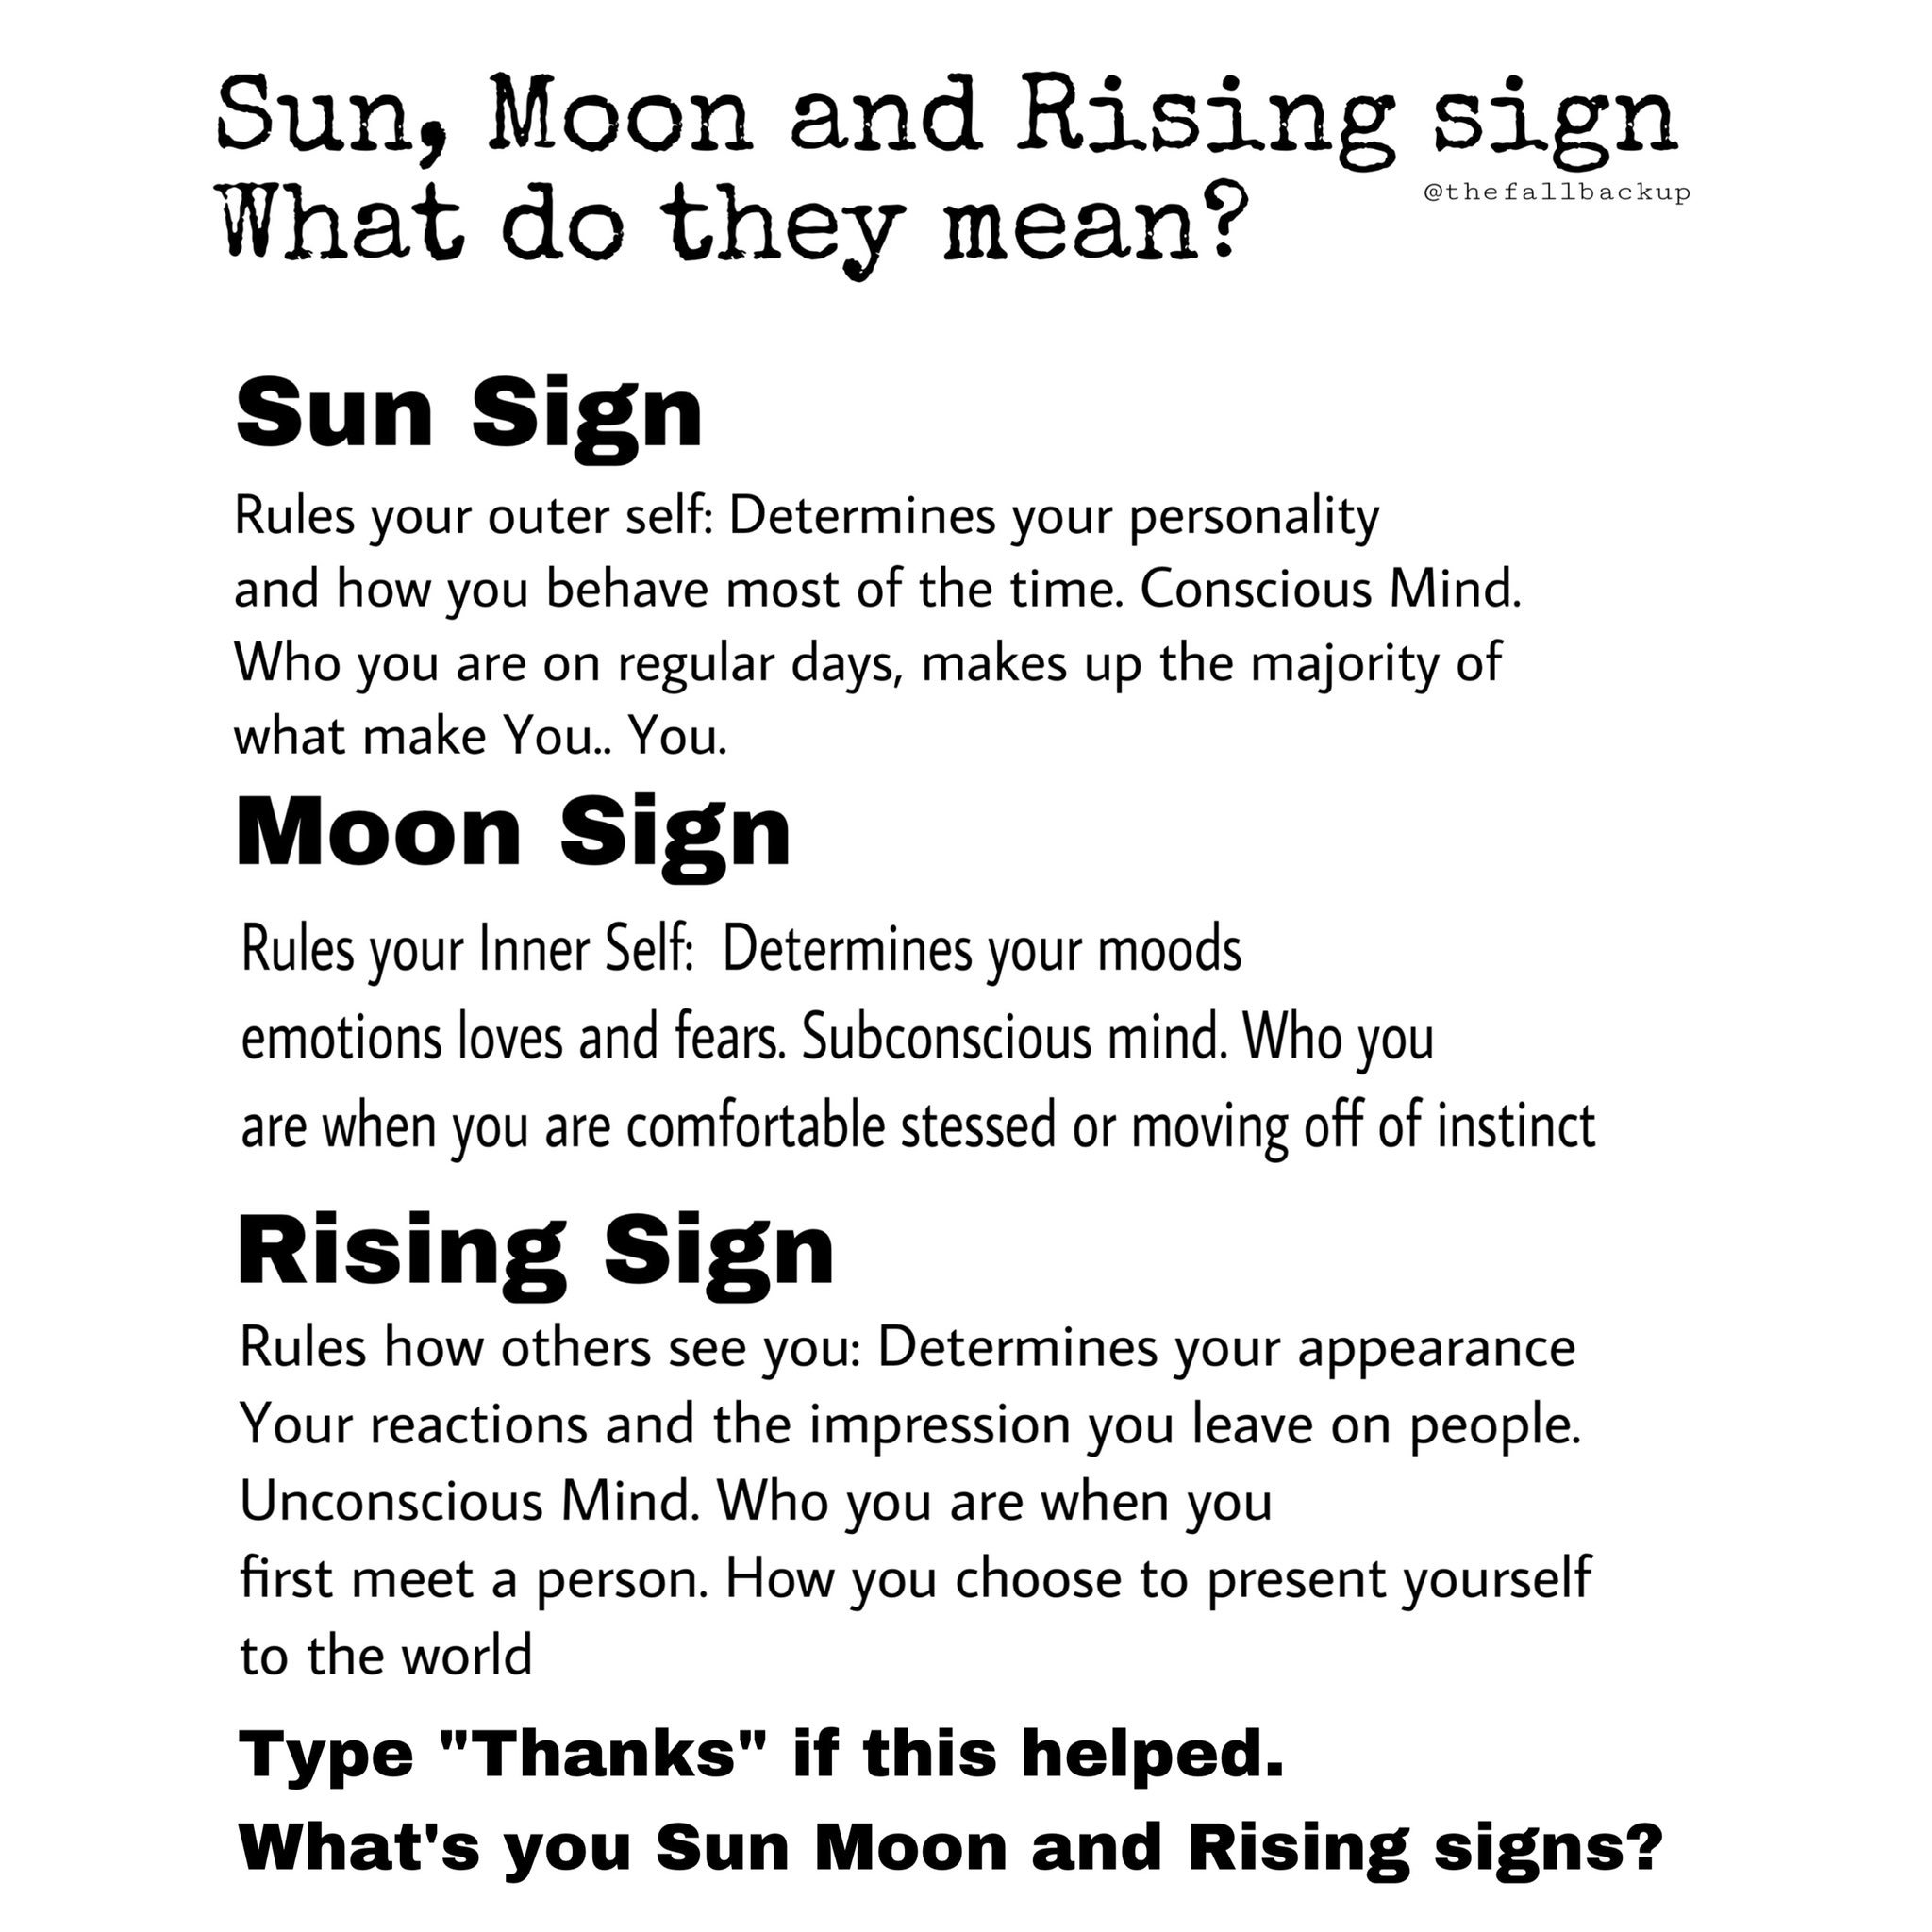 Empath ❀ on X: Here's what your Sun Moon and Rising signs mean